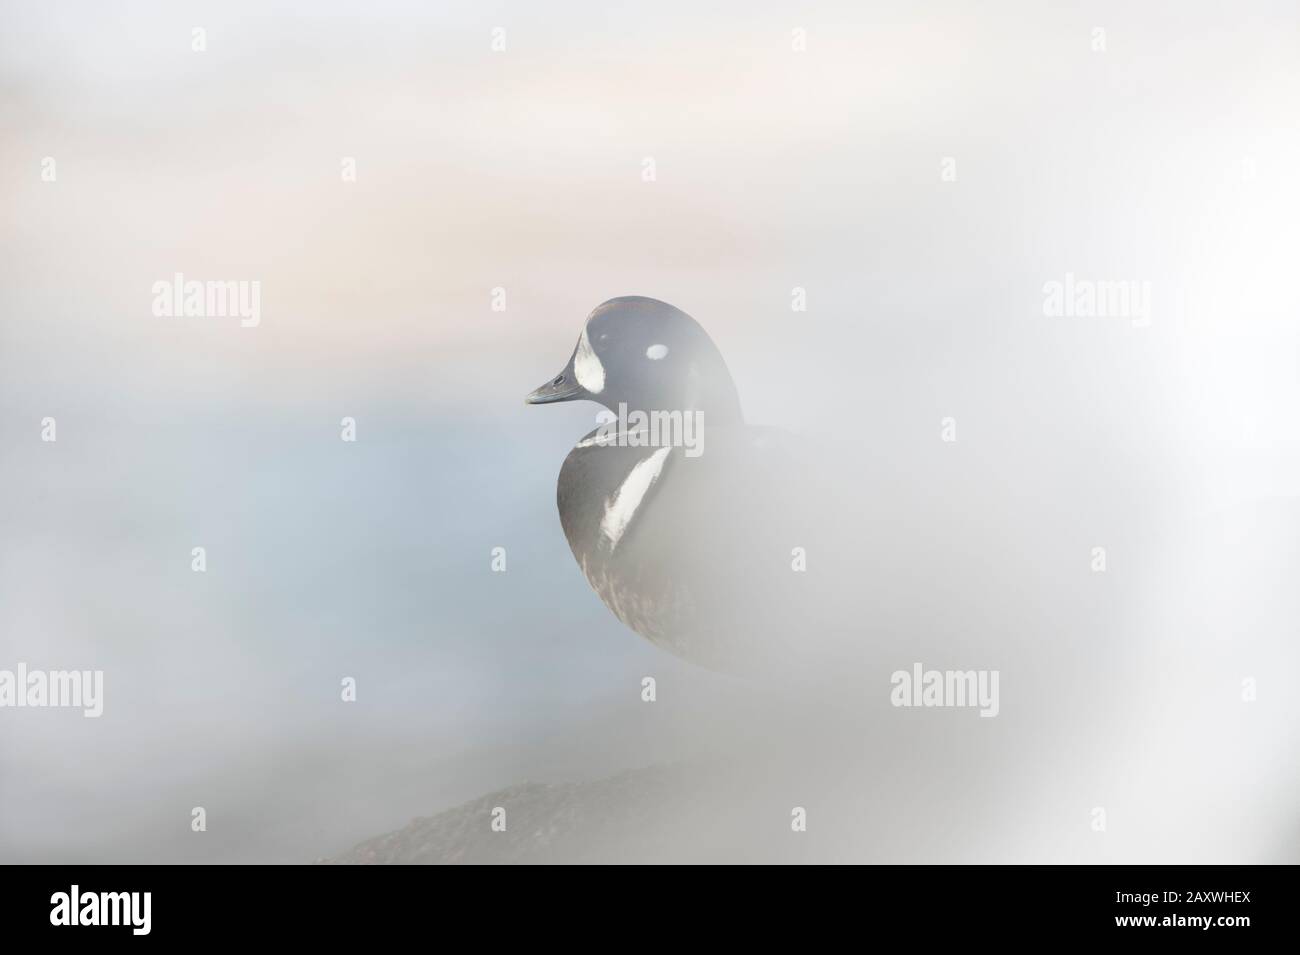 A male Harlequin Duck with a crashing wave in front of it making everything white around the duck. Stock Photo